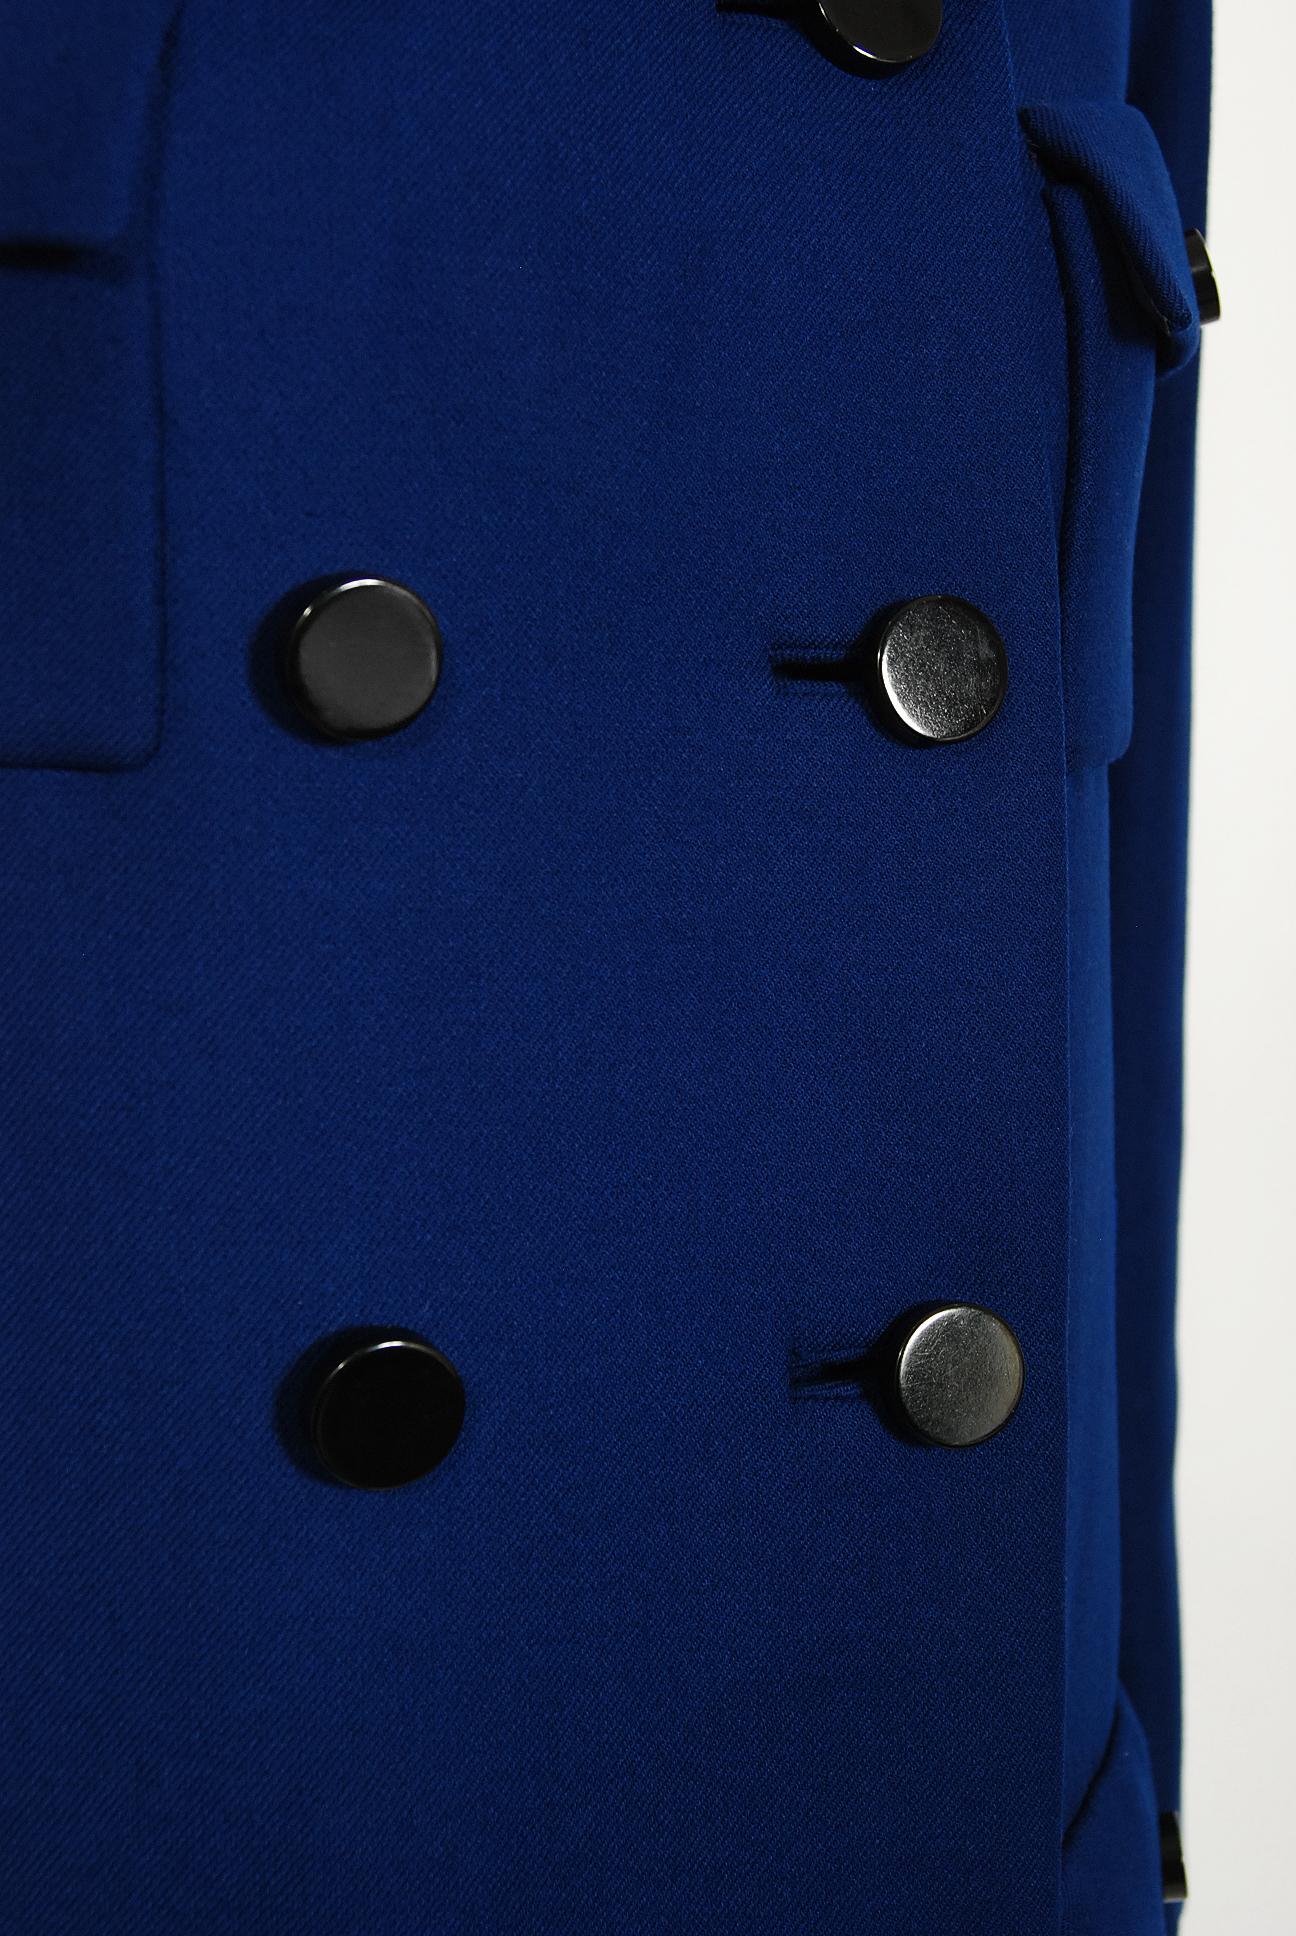 Women's Vintage 1969 Norman Norell Royal Blue Wool Double-Breasted Mod Military Coat For Sale